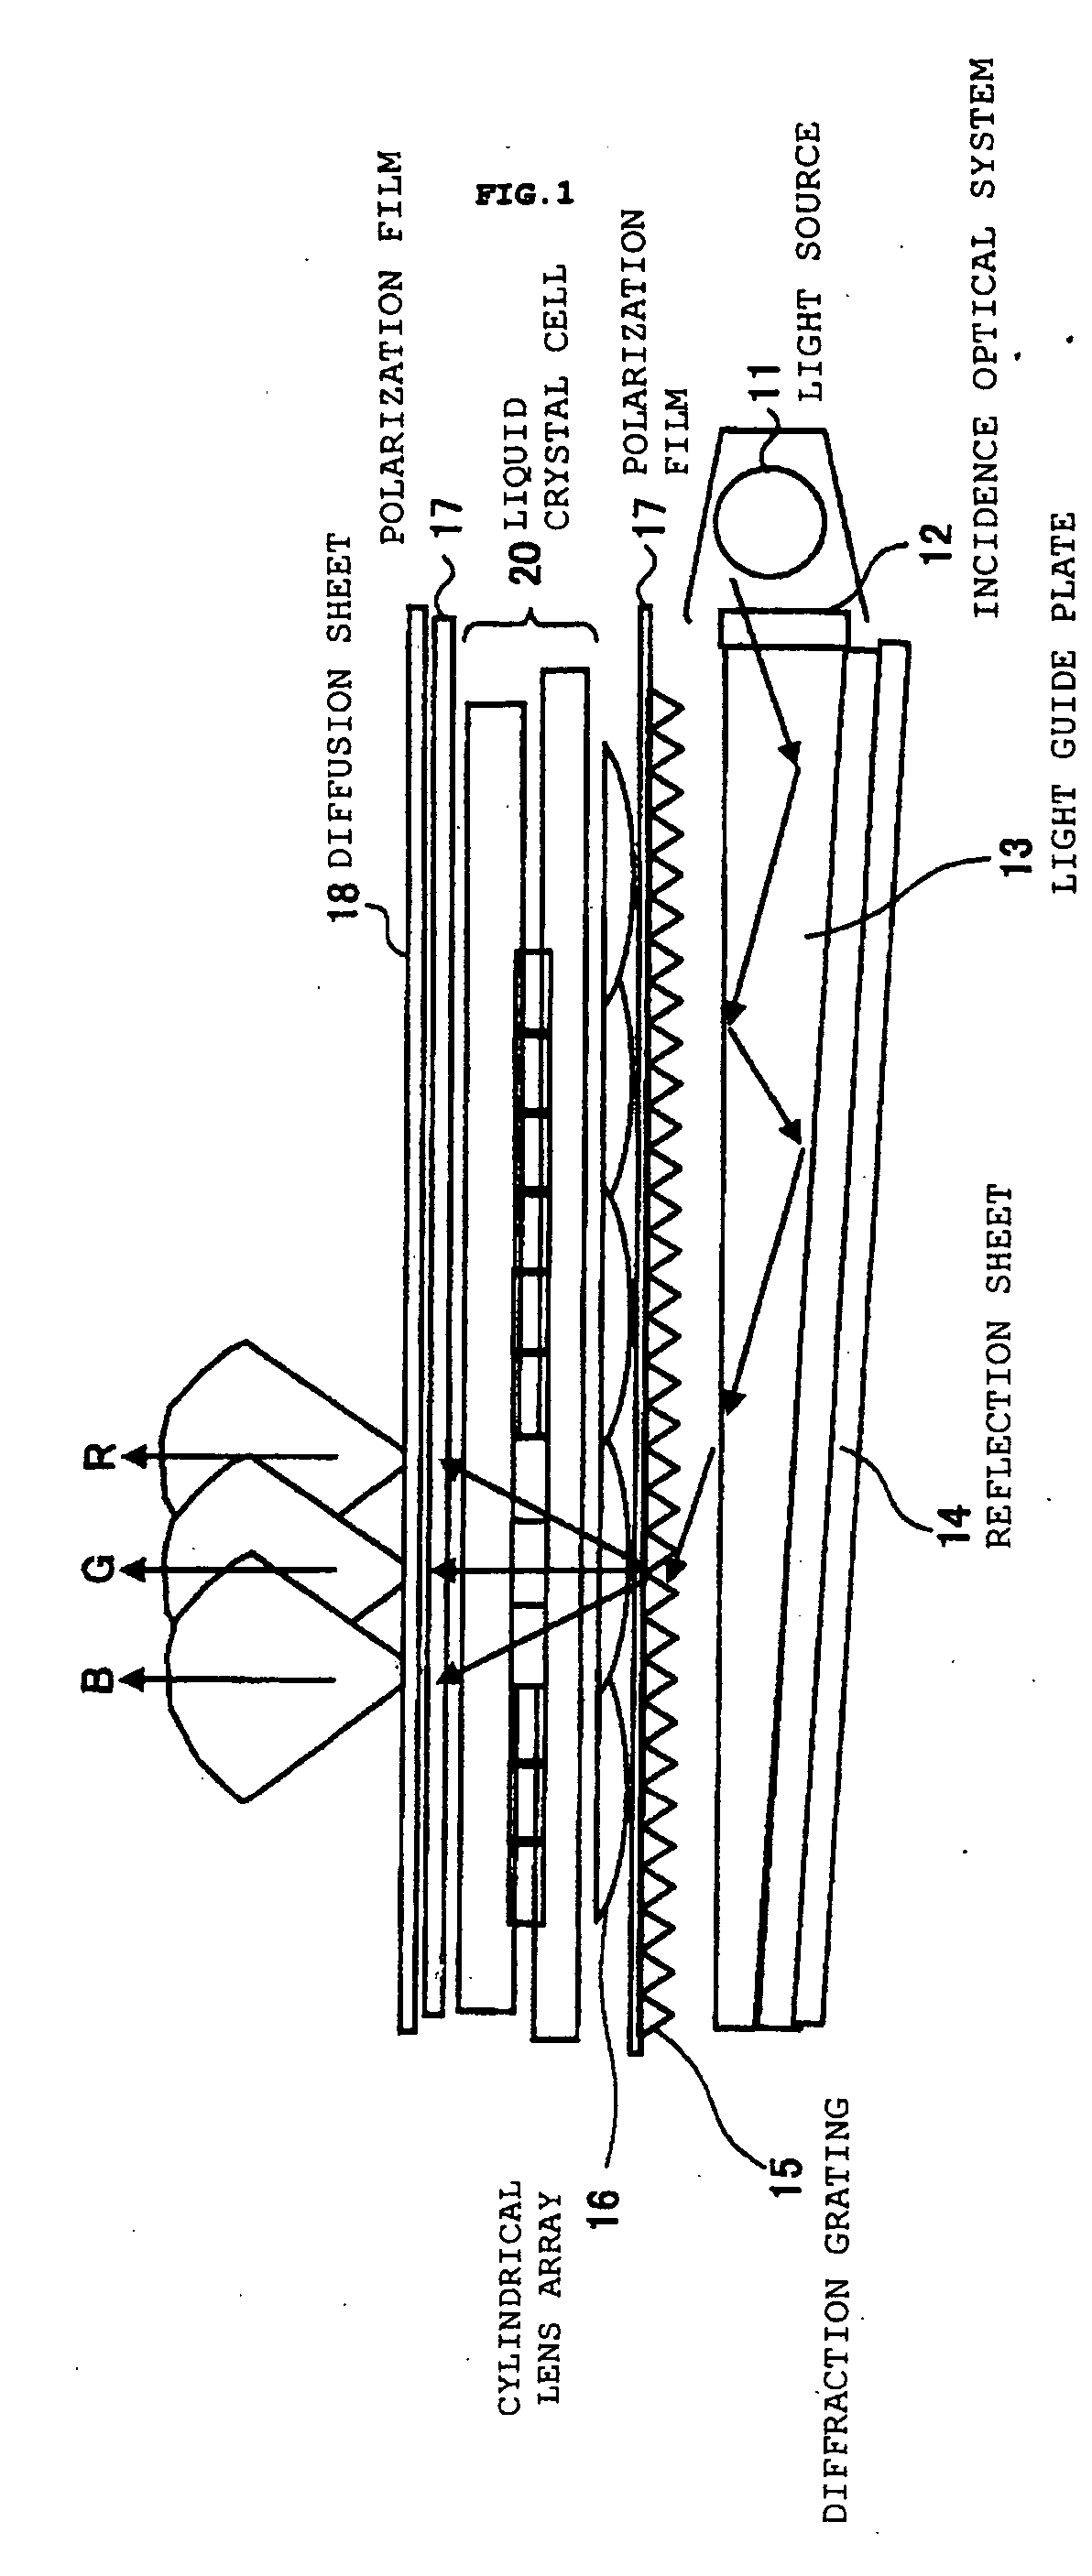 Color filterless display device, optical element, and manufacture